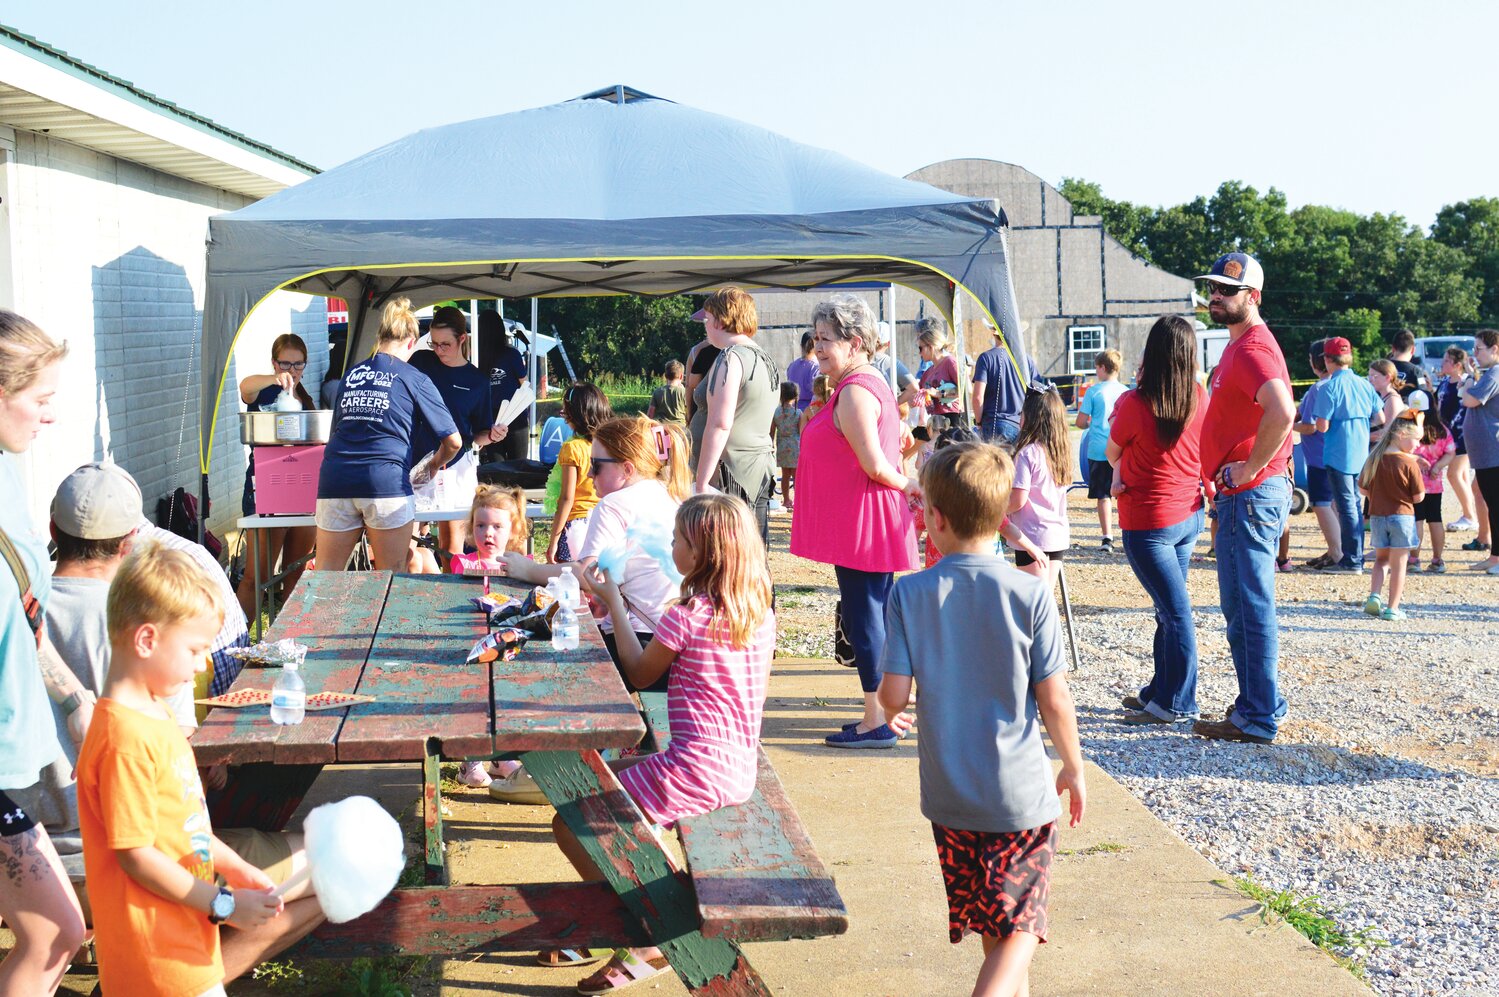 Children of all ages enjoyed games, booths and food on Monday during Kids Night, part of the Madison County IPRA Rodeo Week. The rodeo will take place on Friday and Saturday at Sky High Arena, atop Governors’ Hill in Huntsville.